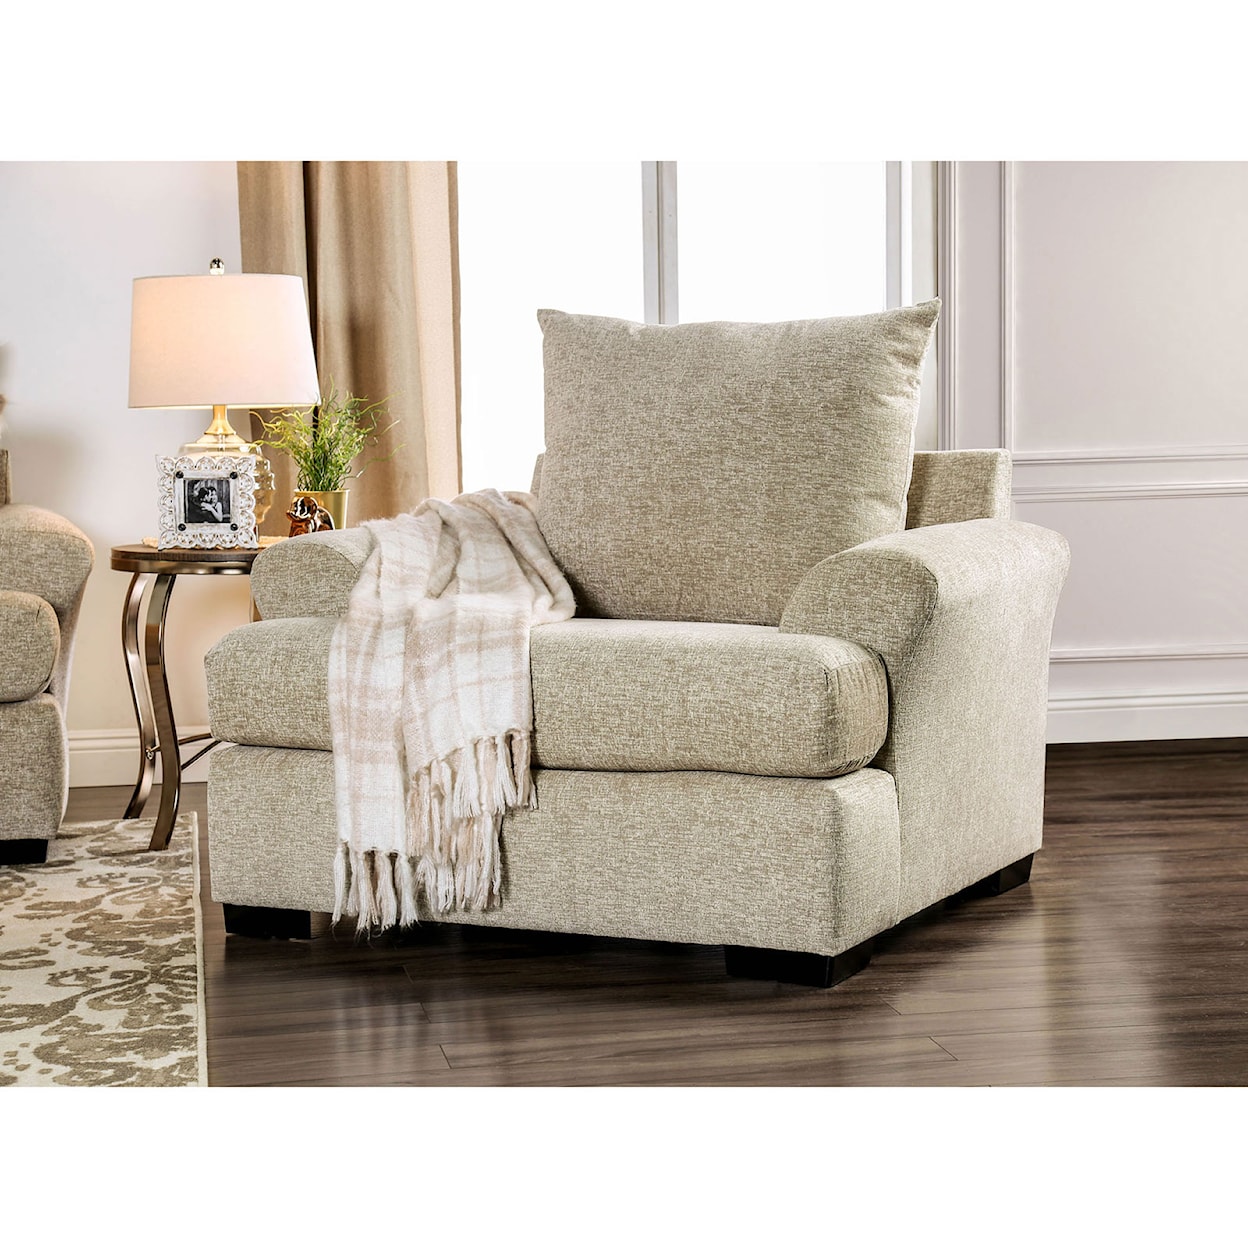 Furniture of America Anthea Chair